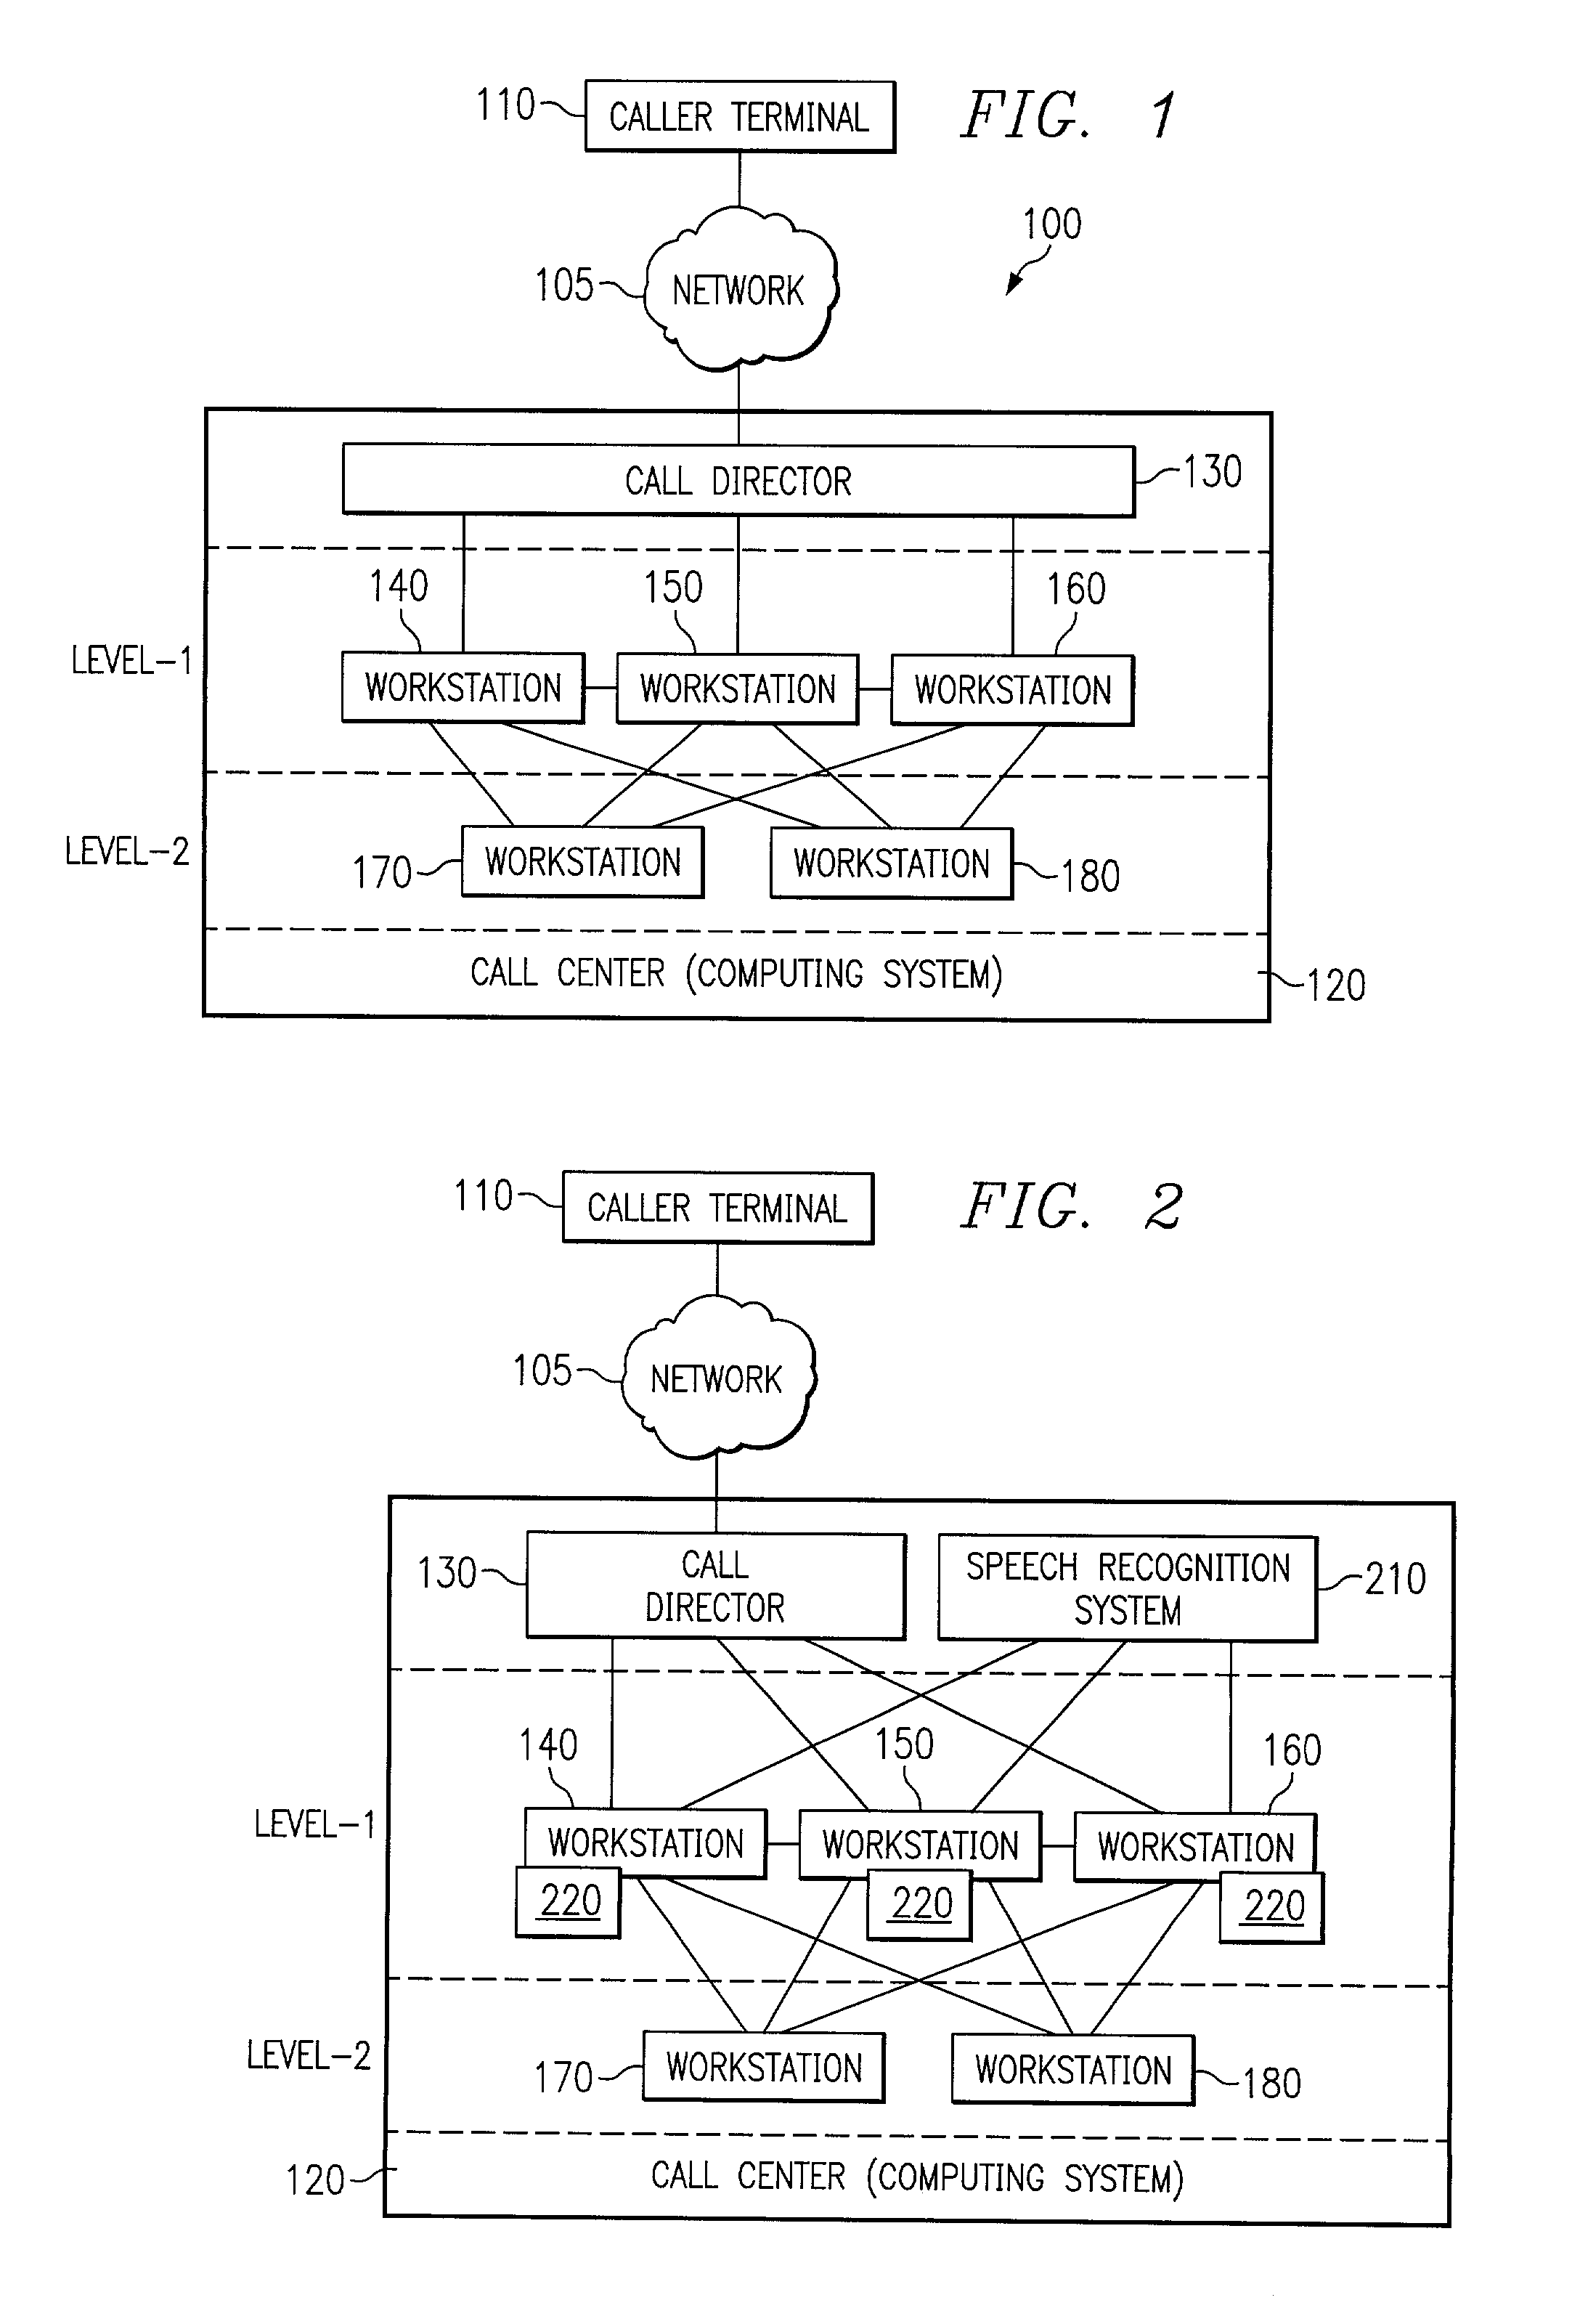 Apparatus, system and method for providing speech recognition assist in call handover